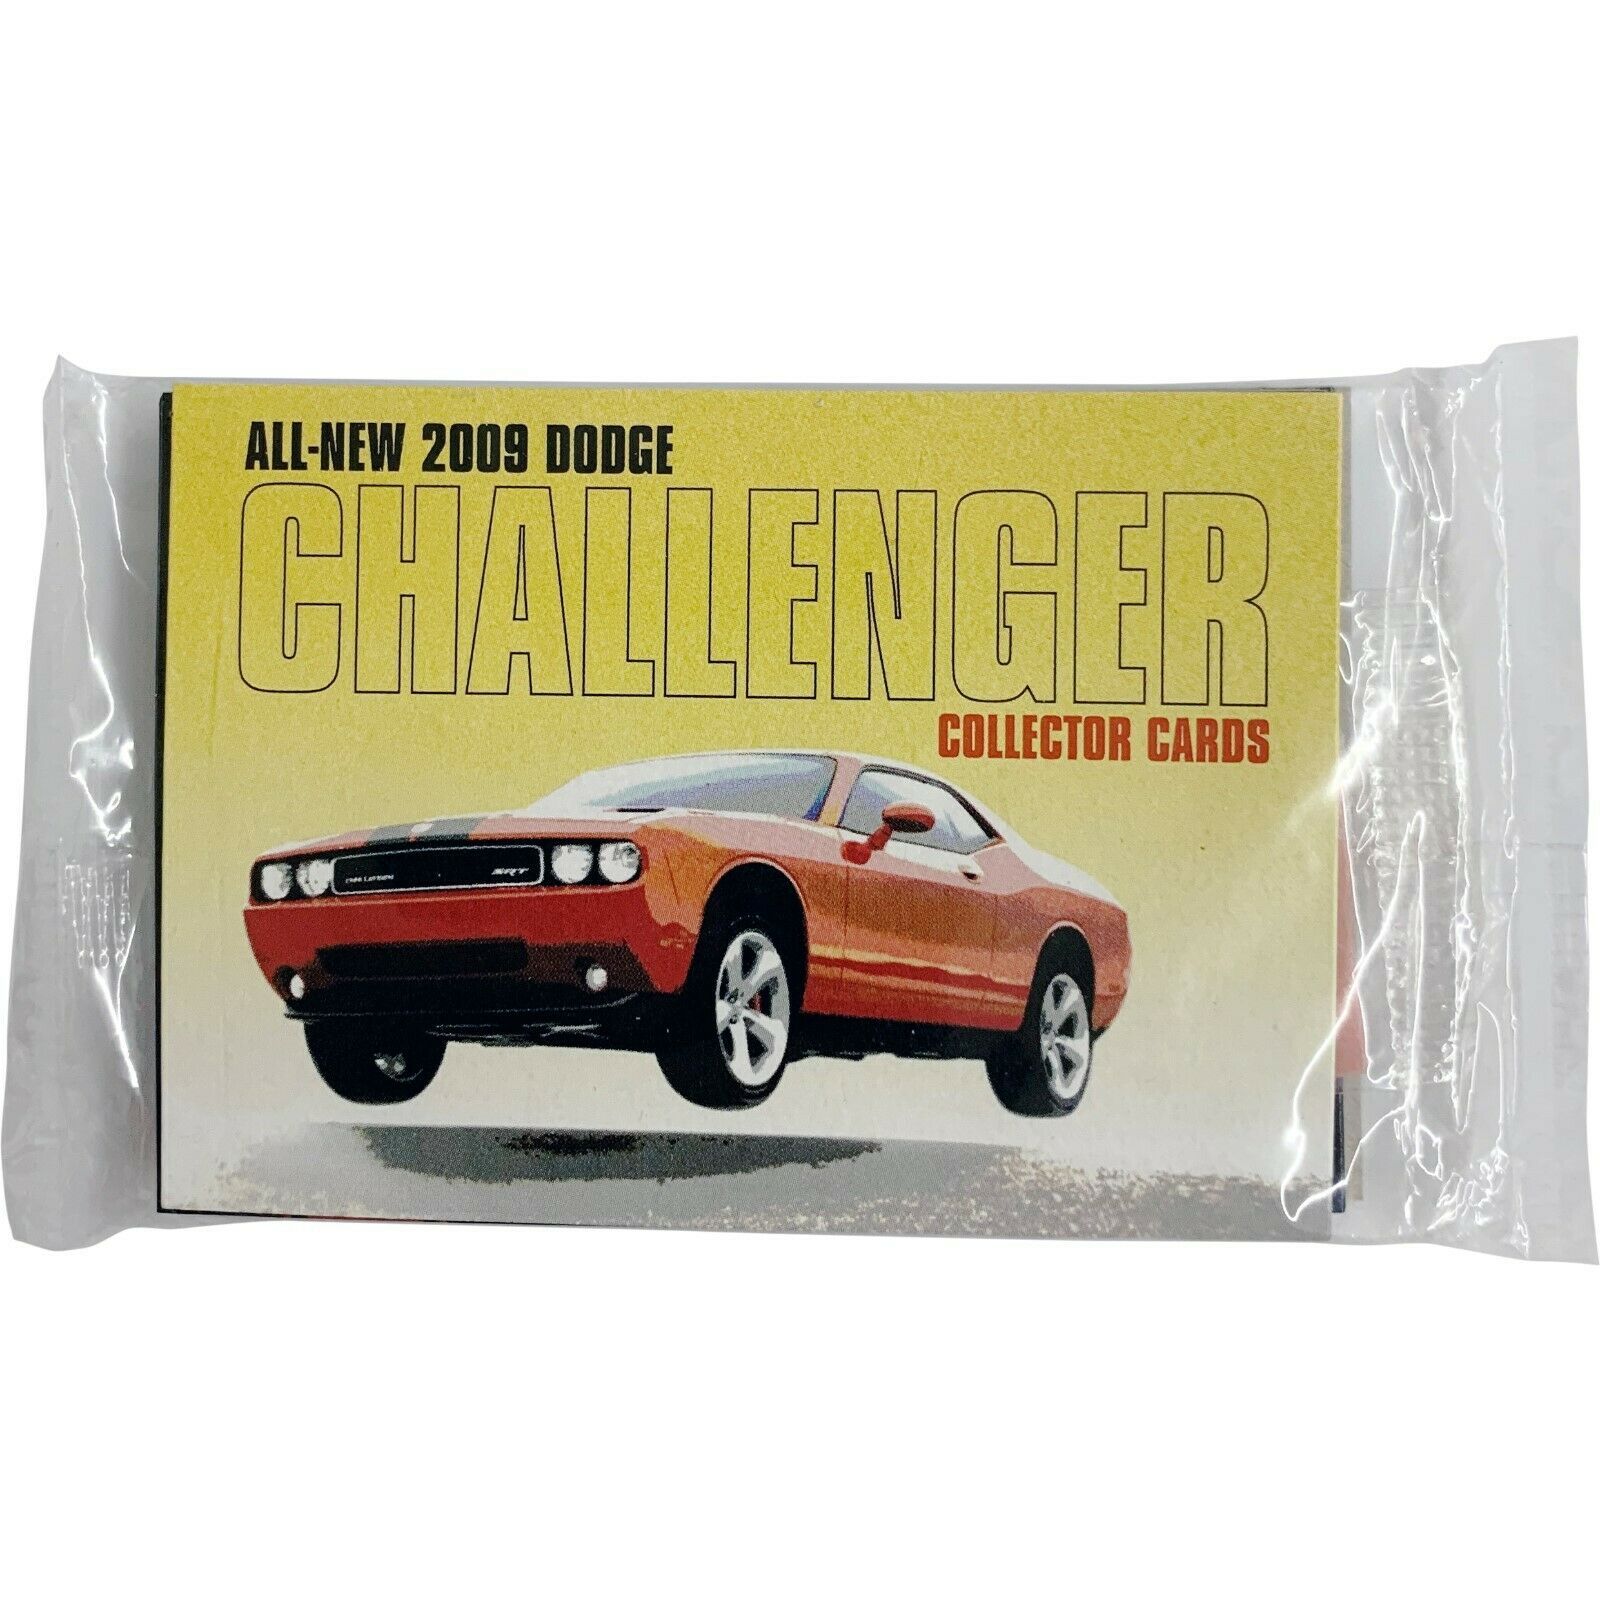 All-New 2009 Dodge Challenger Collector Cards  Brand New in Sealed Package - $9.99